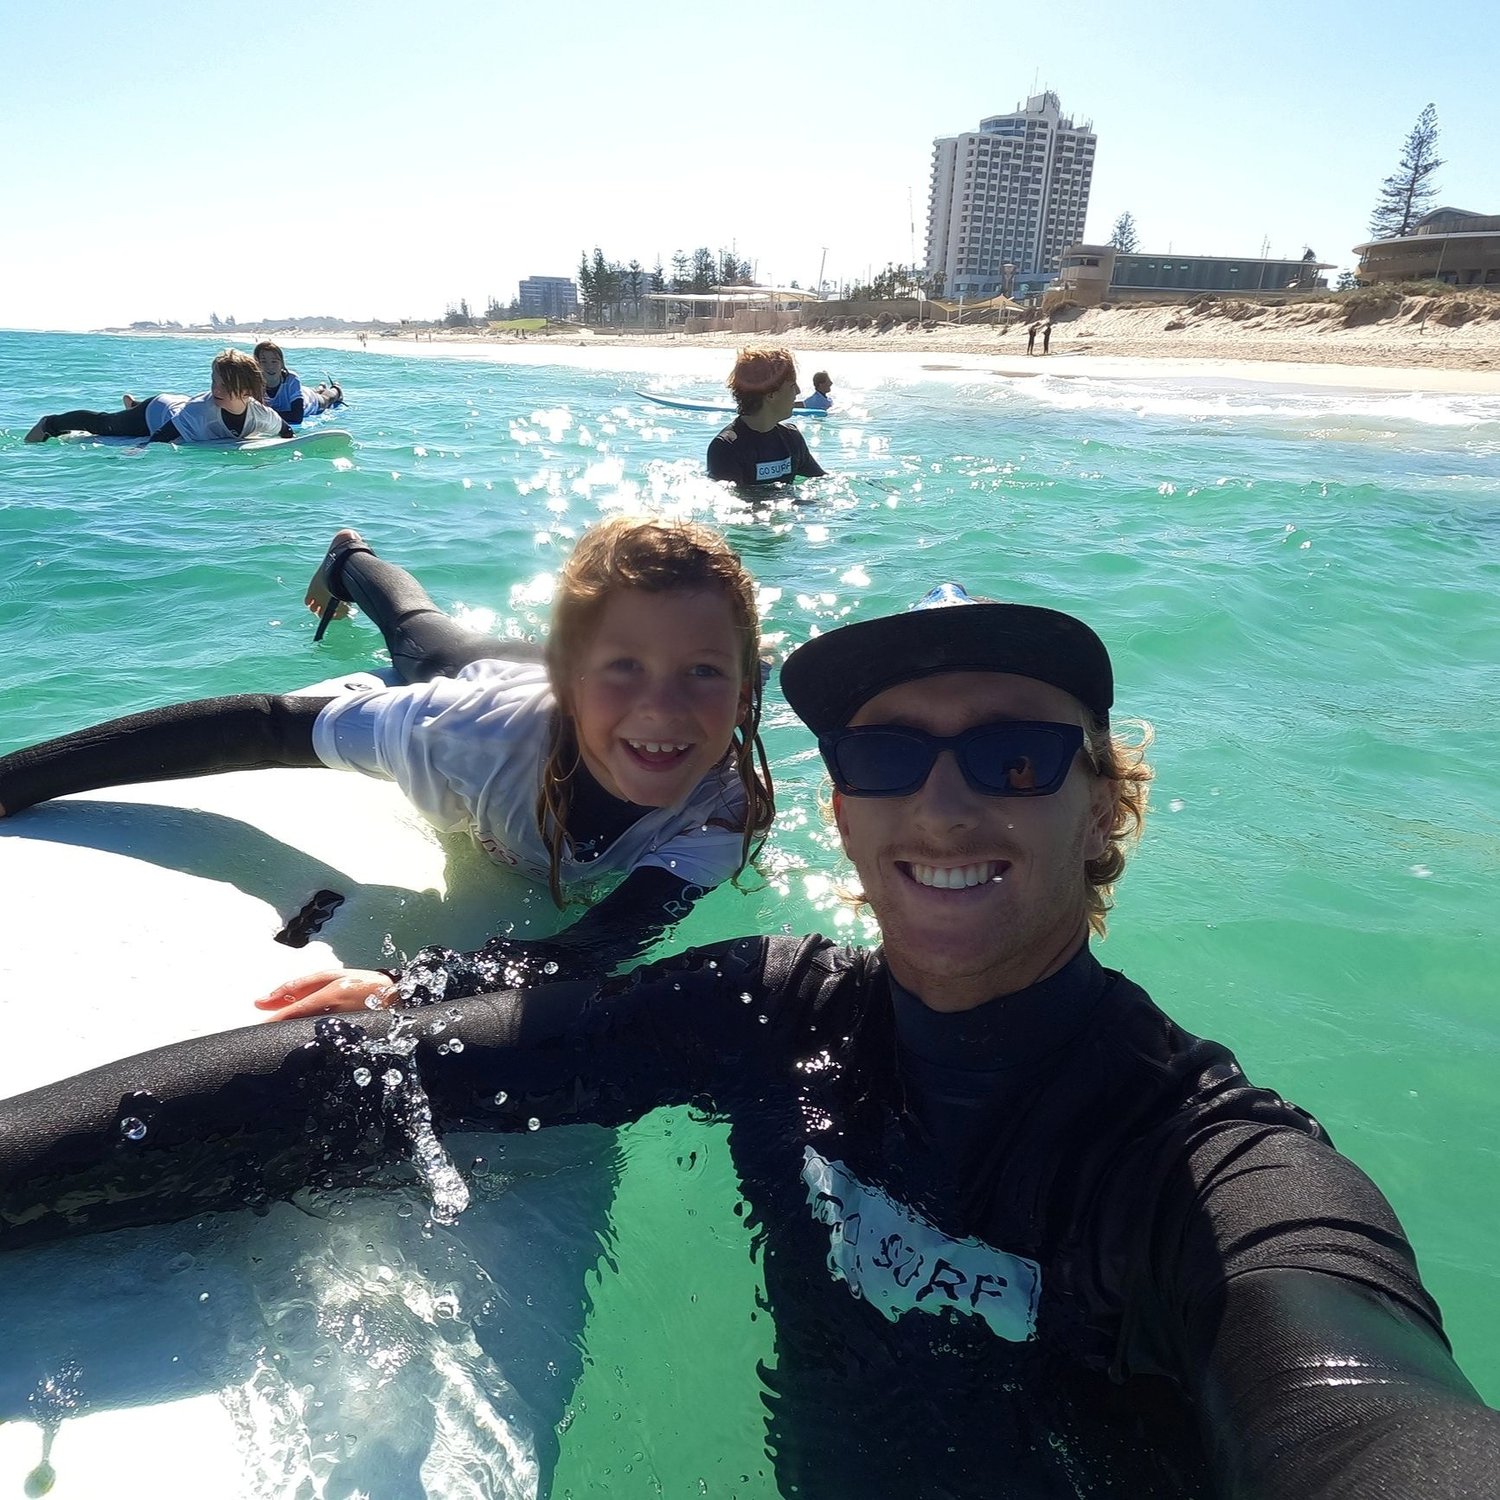 10 amazing reasons to learn to surf in Perth | Go Surf Perth - Surf ...